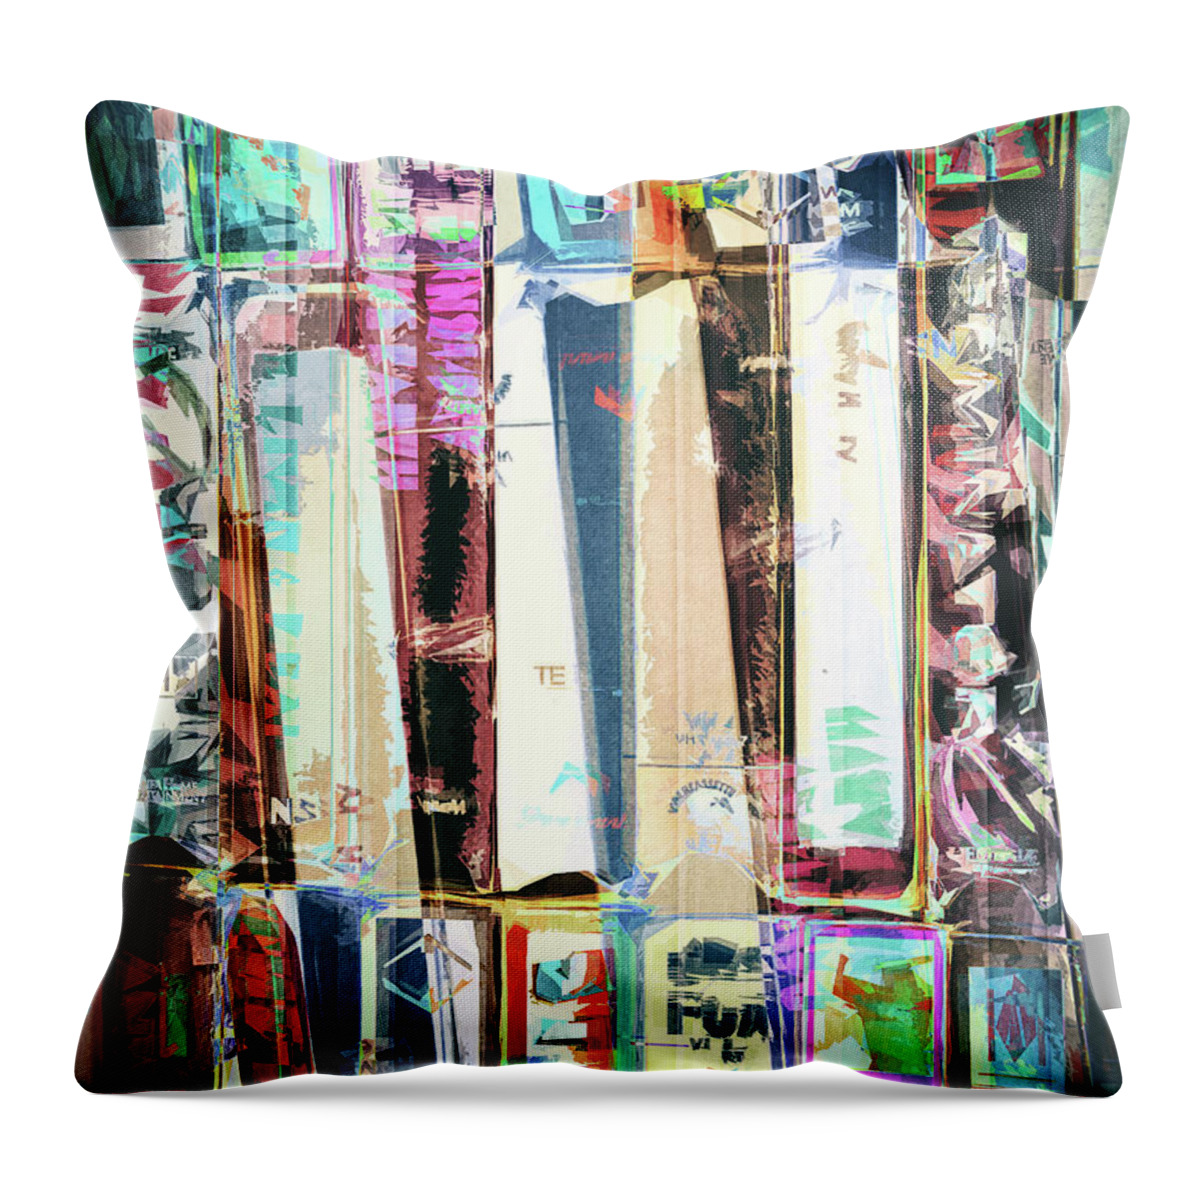 Vcr Throw Pillow featuring the digital art Vintage Videos Abstract by Phil Perkins